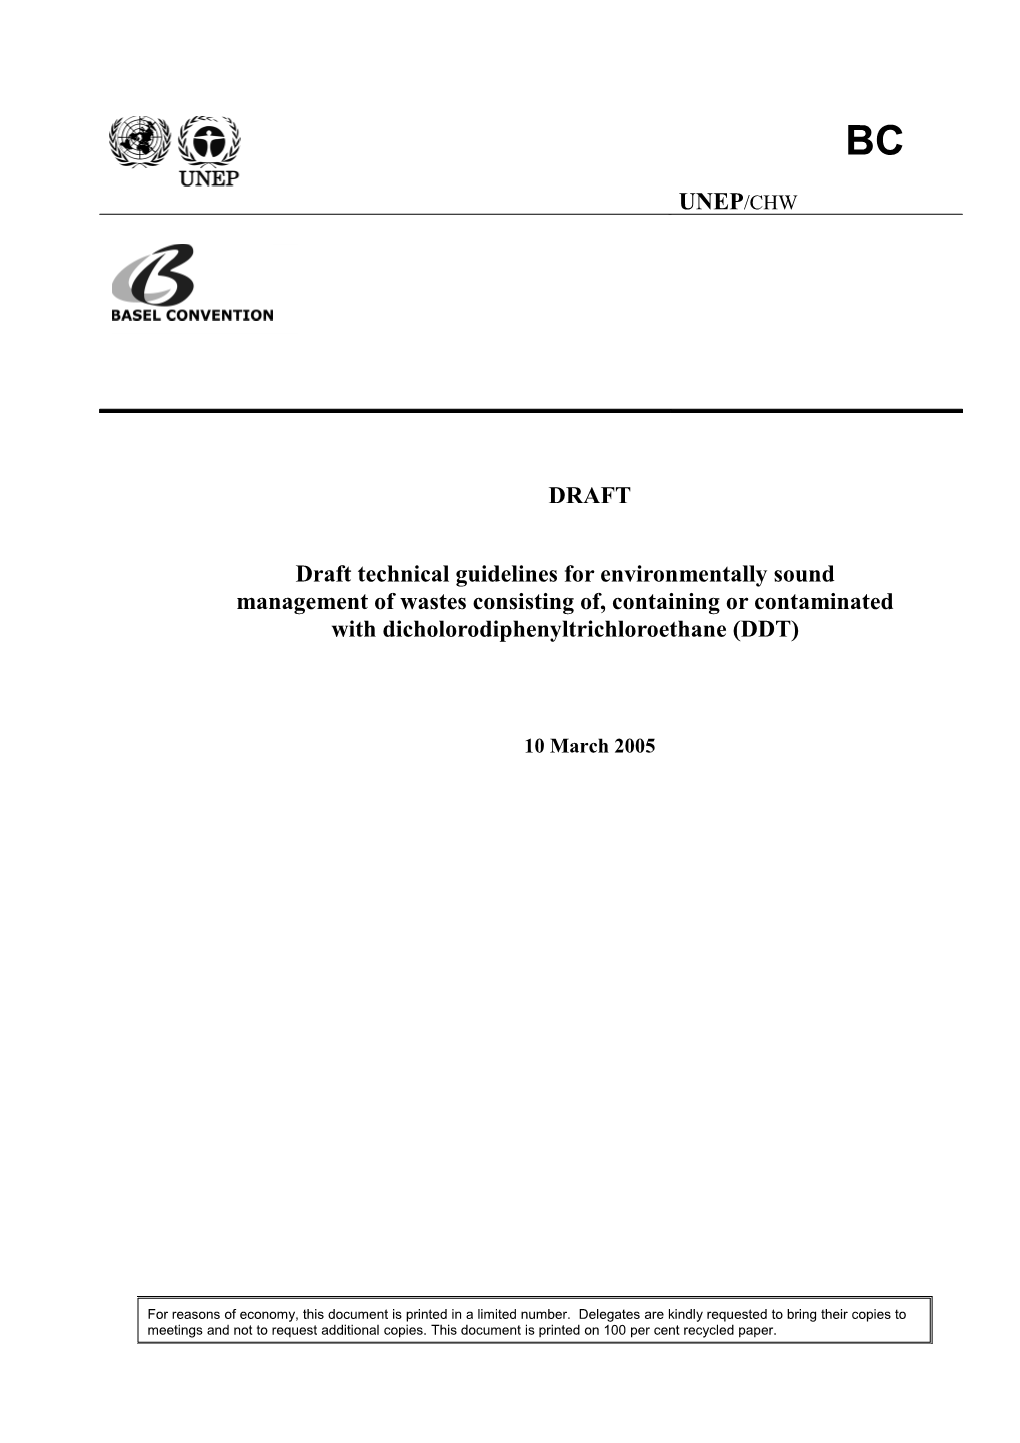 Draft Technical Guidelines for Environmentally Sound Management of Wastes Consisting Of